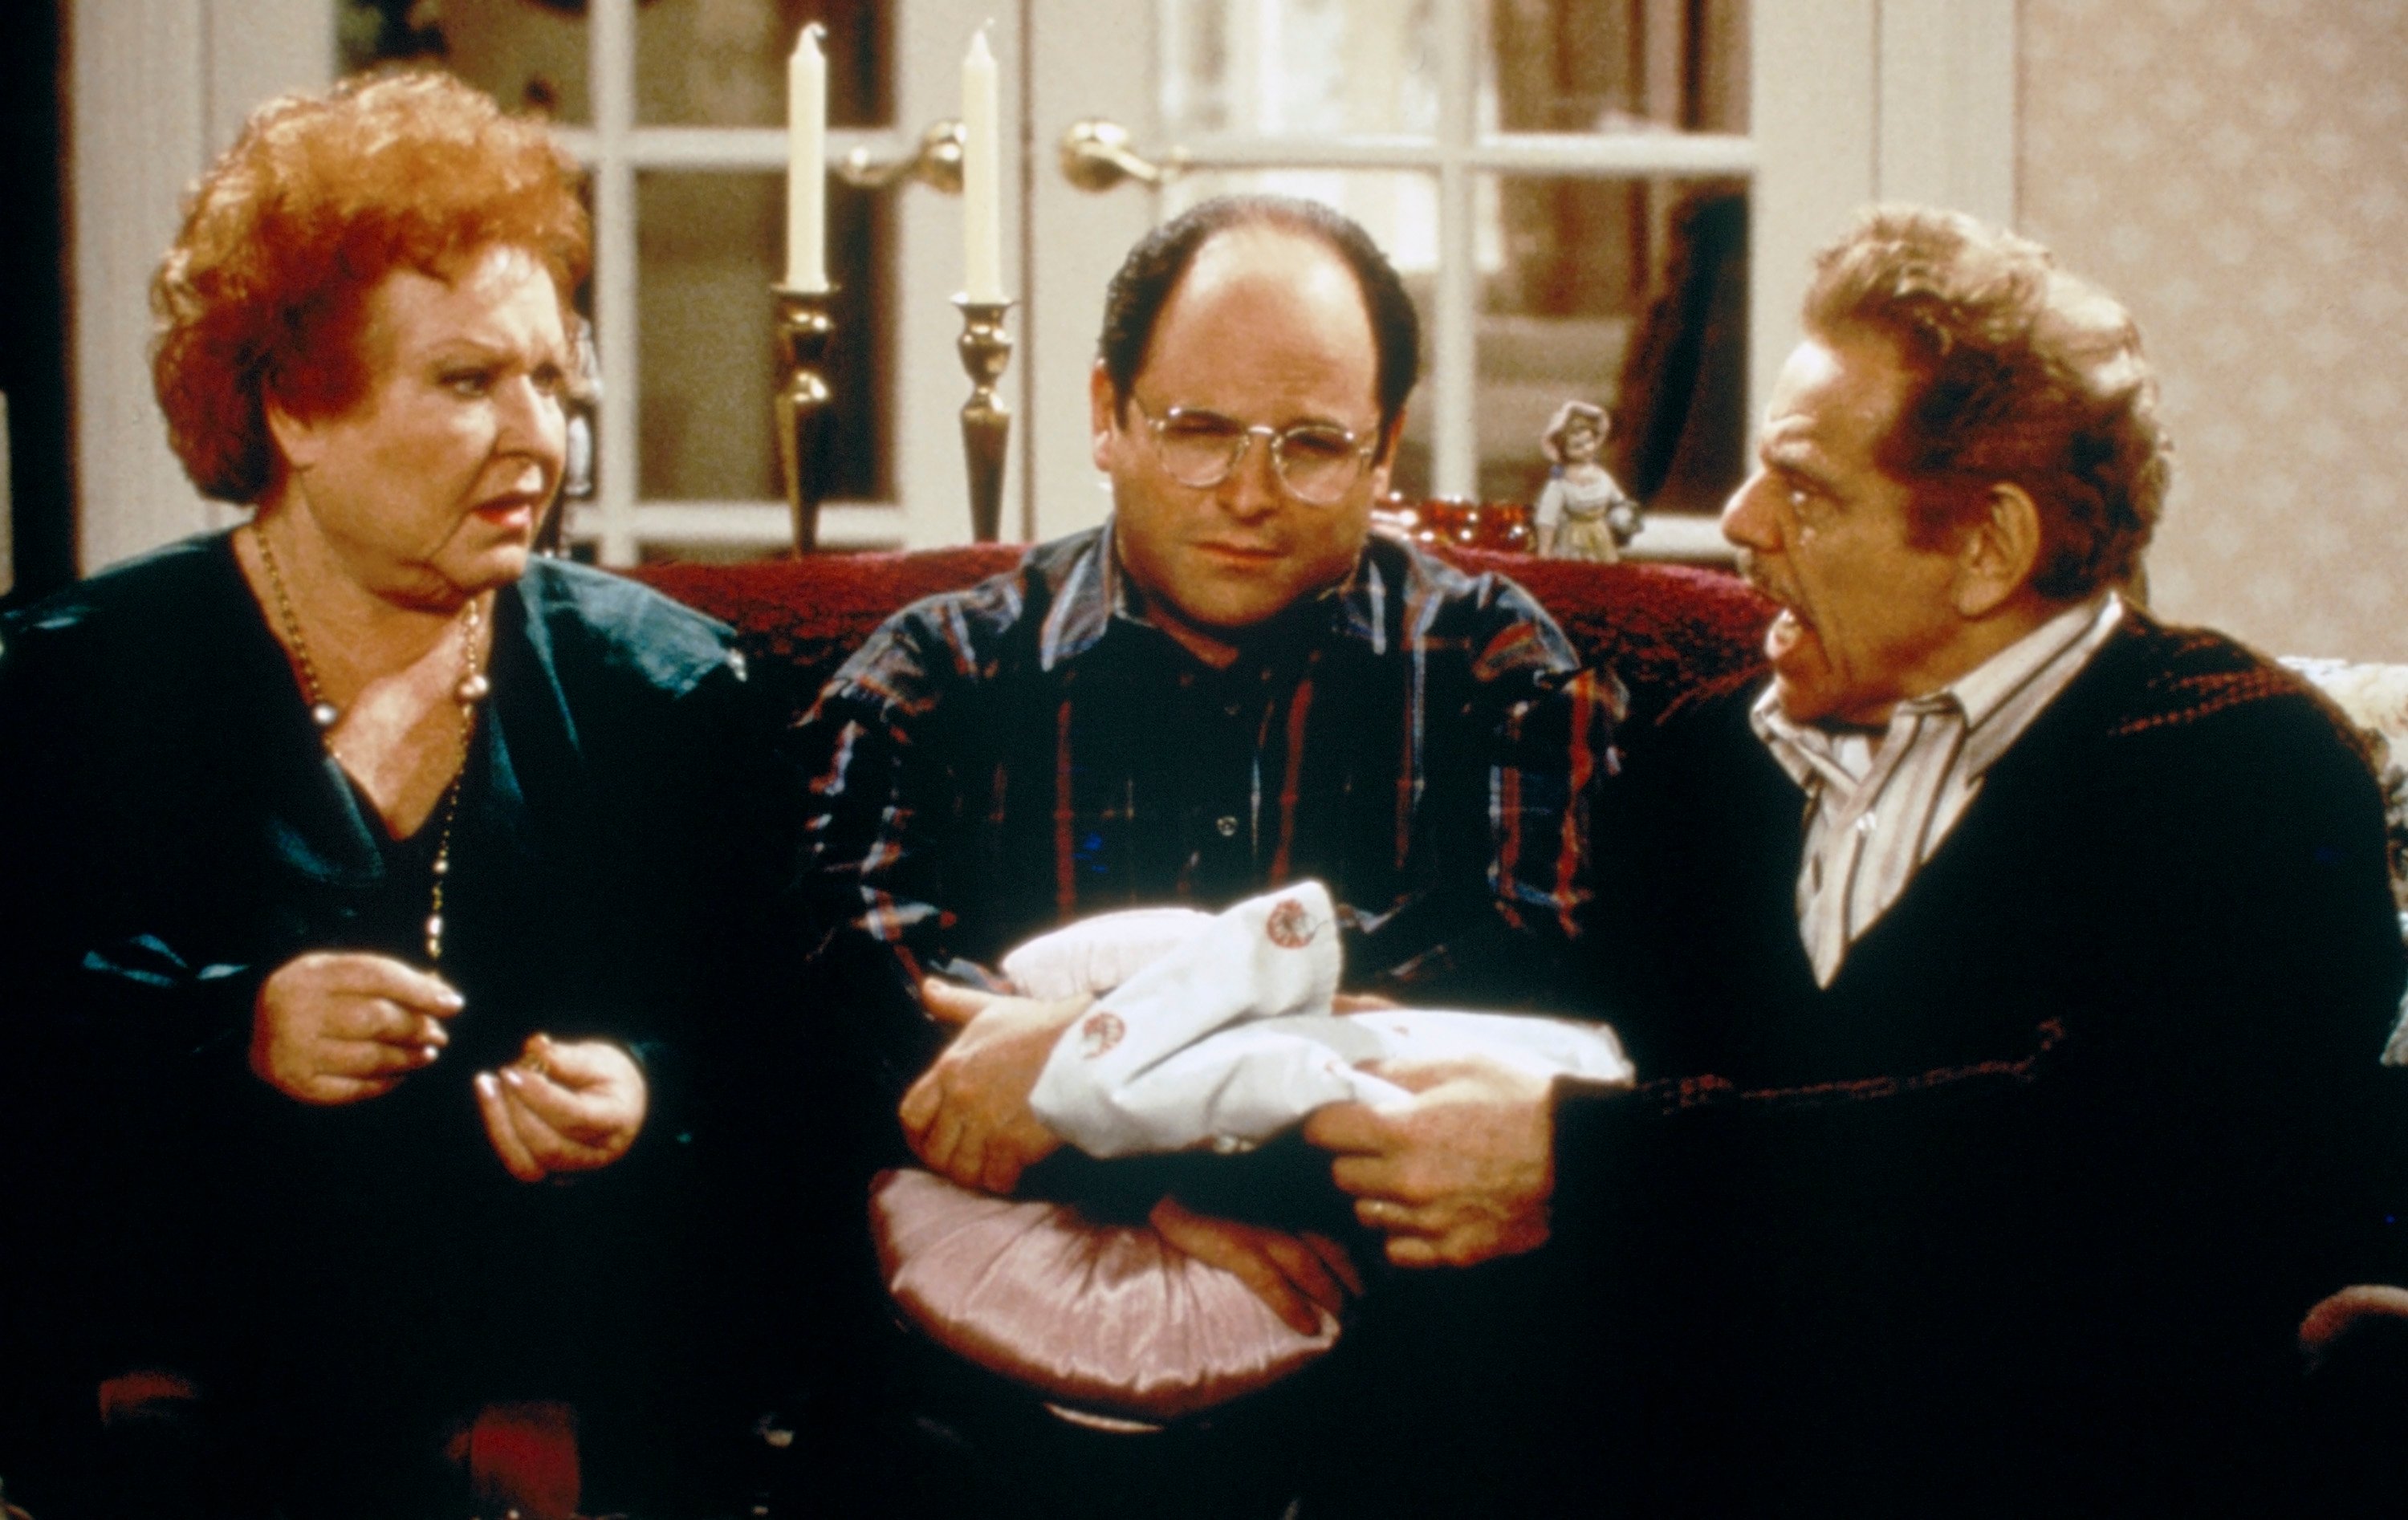 Estelle, George and Frank Costanza. Frank Costanze was responsible for Festvus' origins in the fictionalized version of the holiday